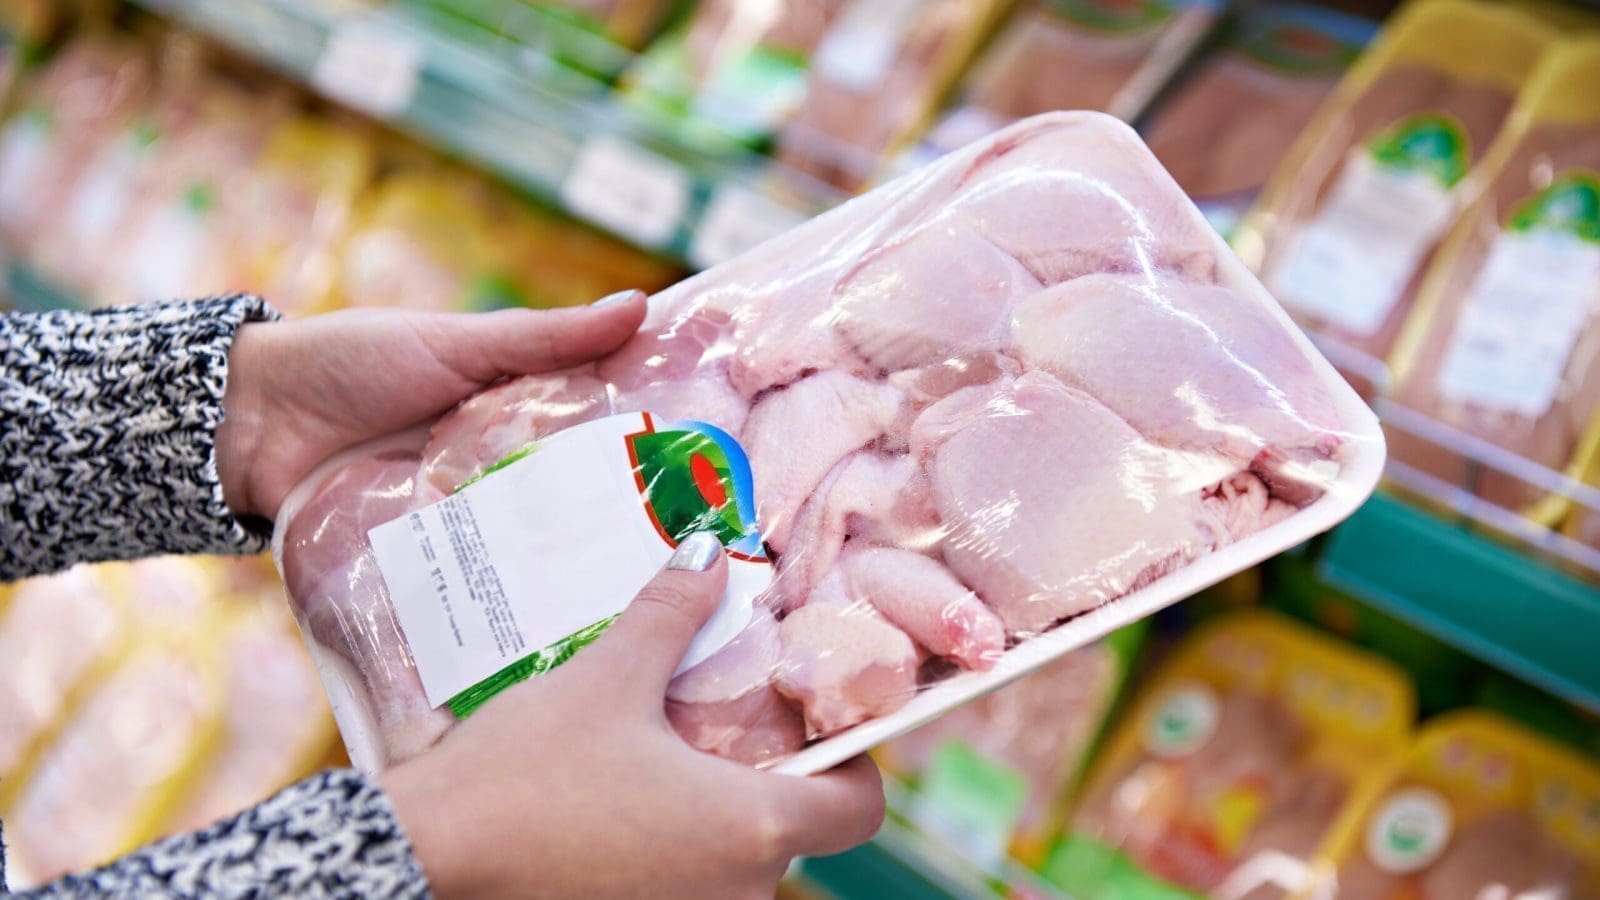 High chicken prices squeeze grocery store shoppers amid rising inflation, supply dynamics